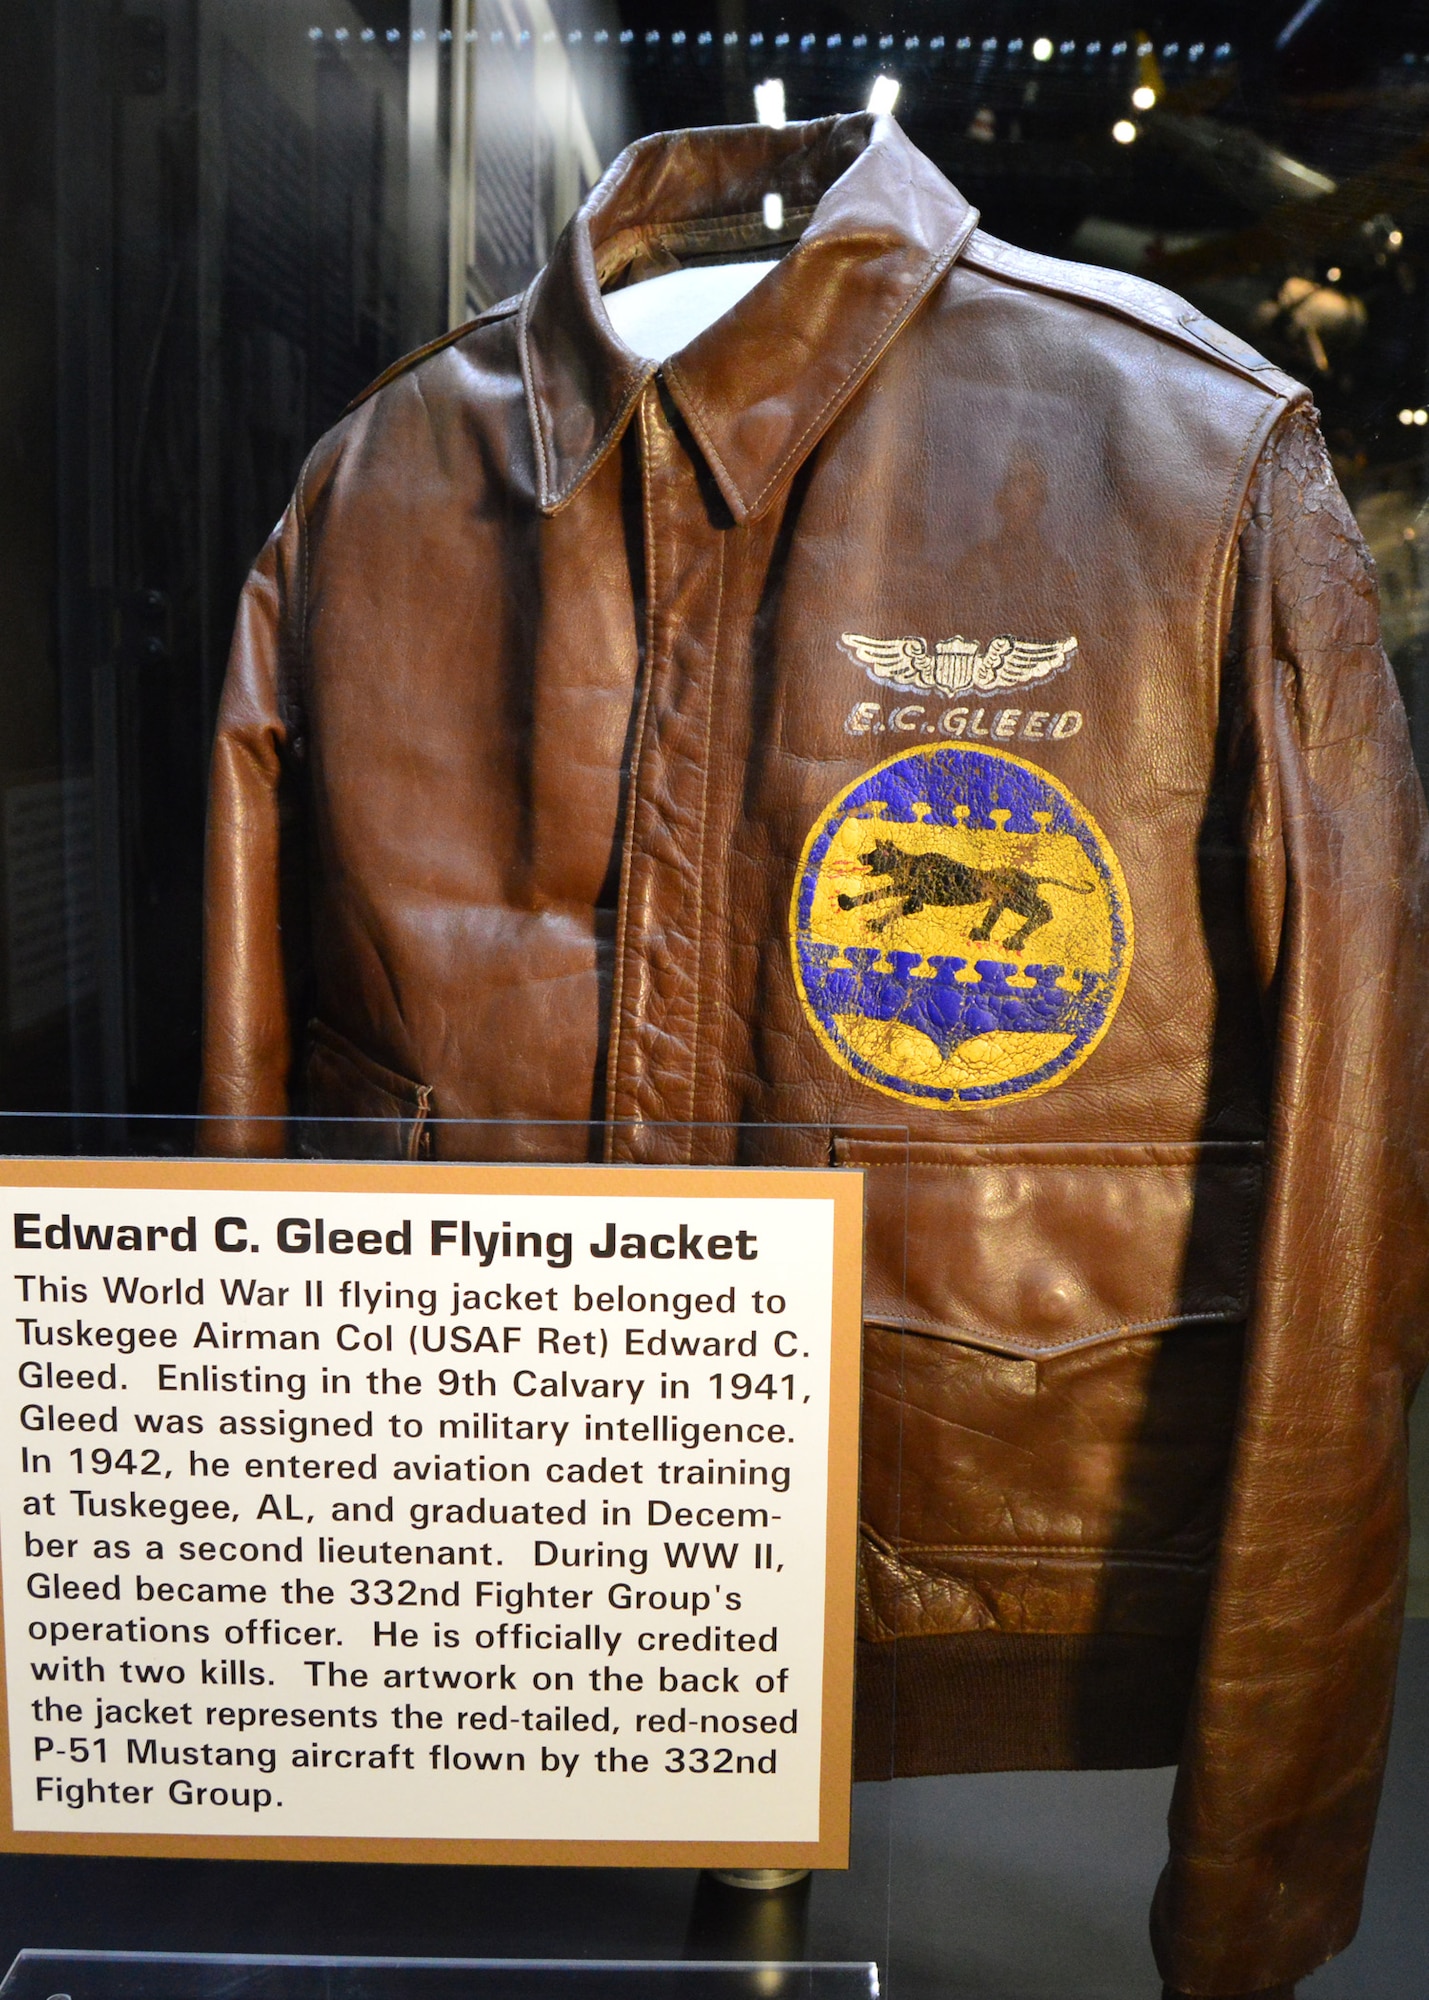 DAYTON, Ohio -- This World War II flying jacket belonged to Tuskegee Airman Col. (Ret.) Edward C. Gleed and is on display in Tuskegee Airmen exhibit in the WWII Gallery at the National Museum of the U.S. Air Force. (U.S. Air Force photo)